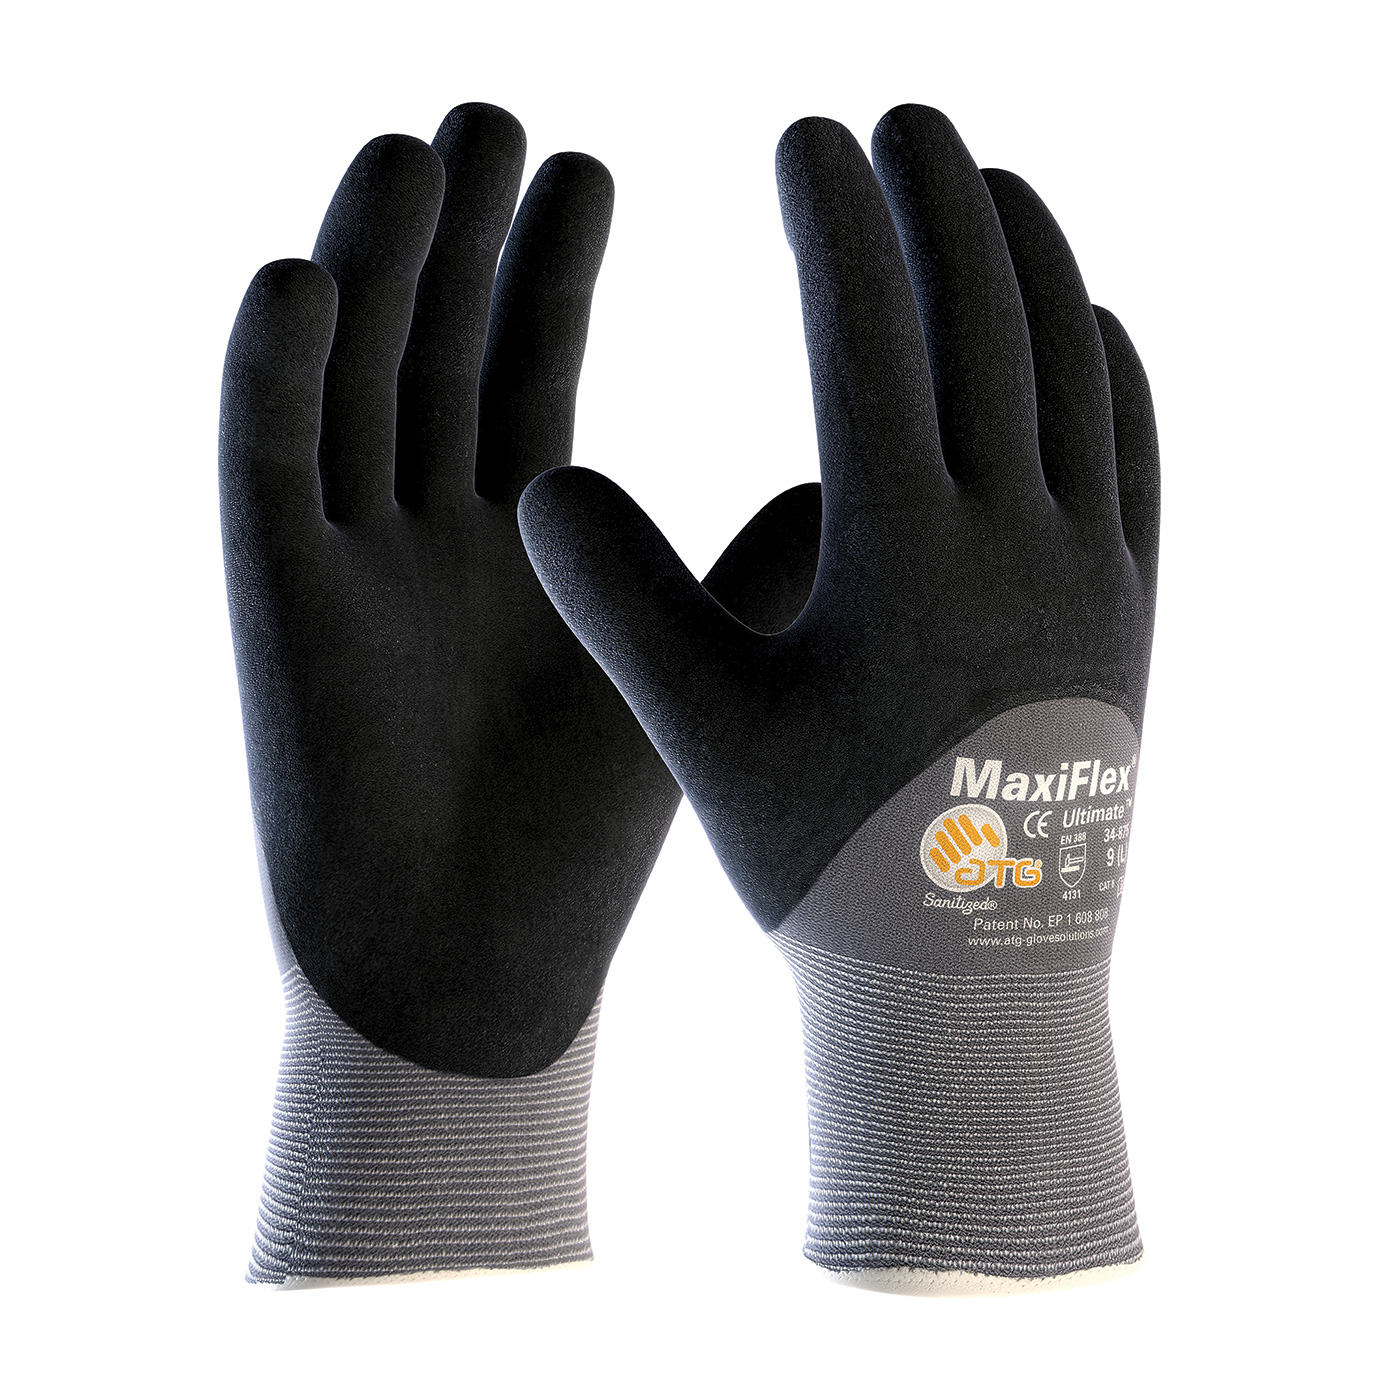 PIP 34-875/L MaxiFlex Ultimate Seamless Knit Nylon/Lycra Glove with Nitrile Coated MicroFoam Grip on Palm, Fingers & Knuckles - Large PID-34 875 L